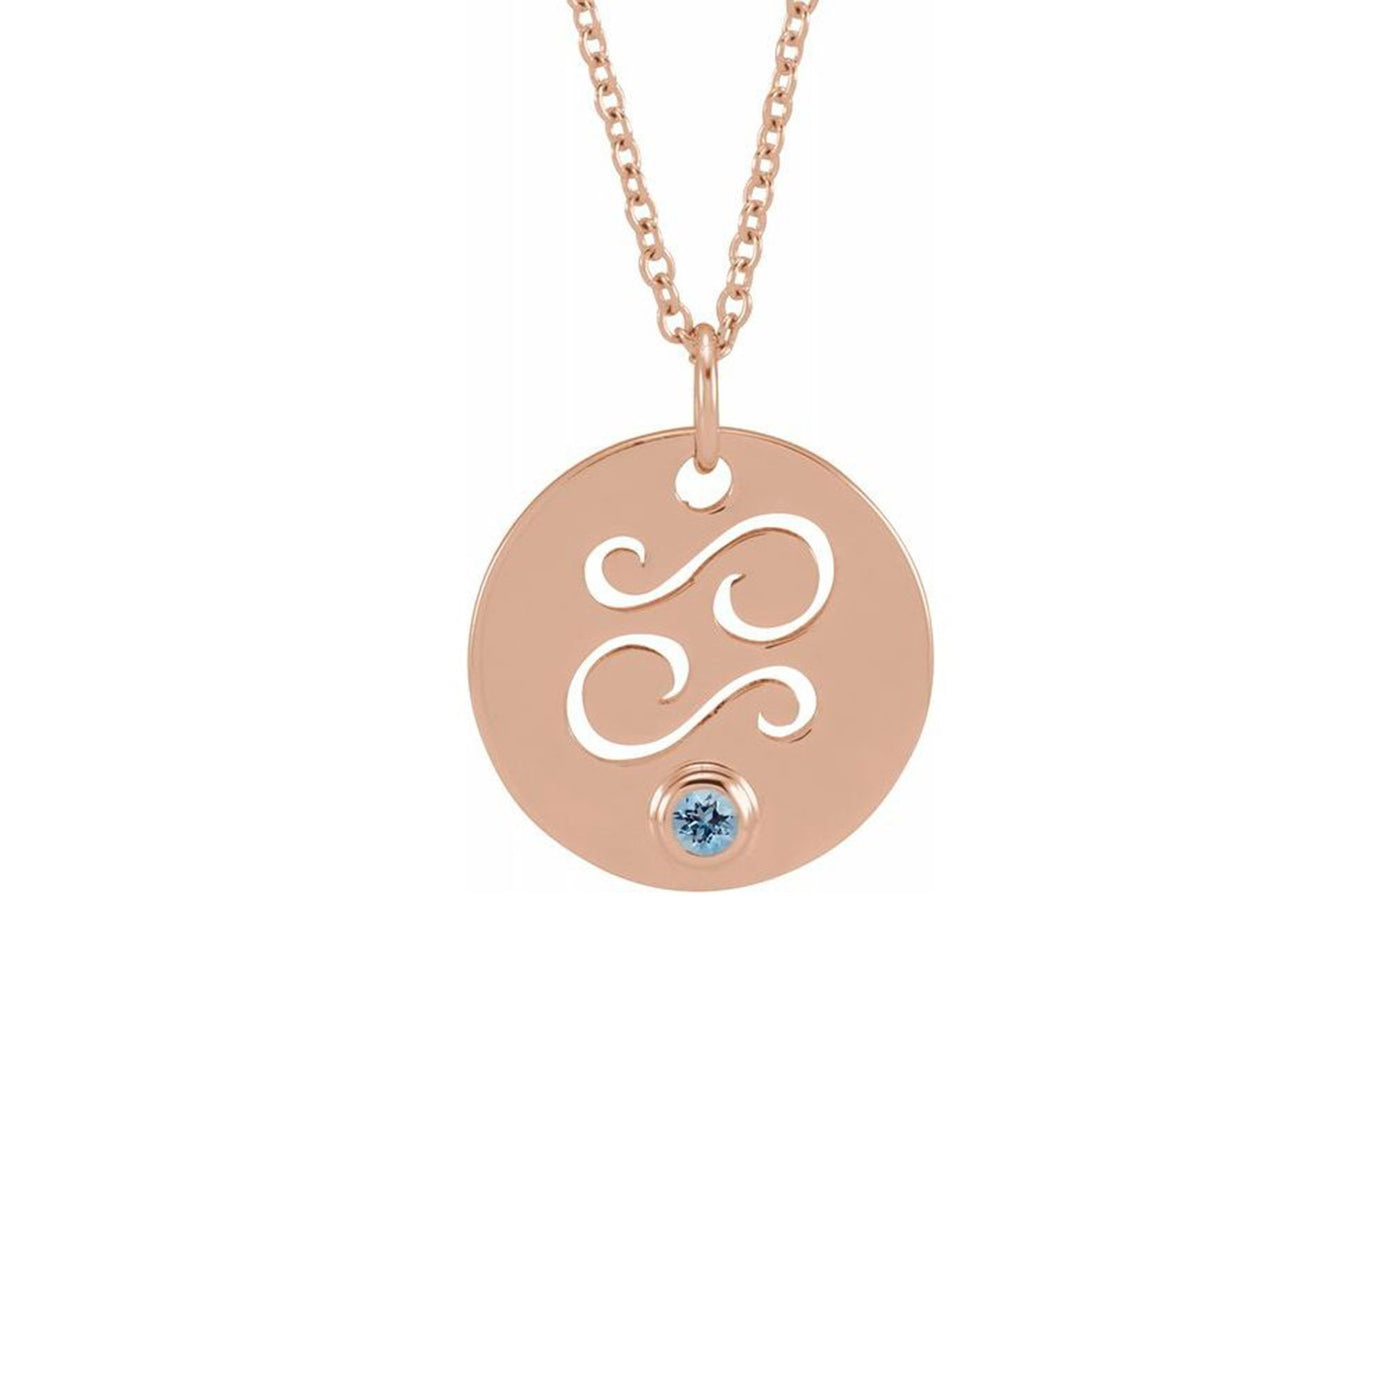 Cancer Zodiac Sign Cut-Out with Gemstone Necklace